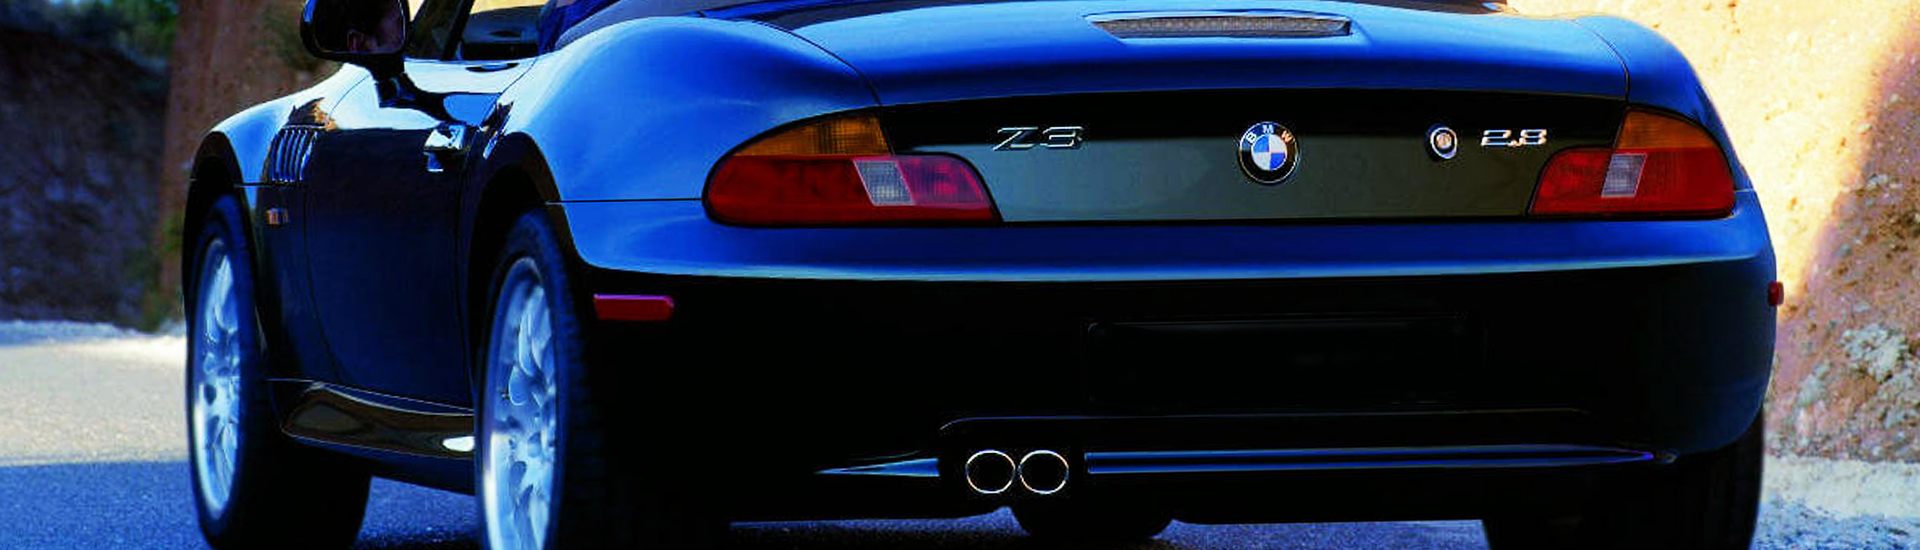 BMW Z3 Tail Light Tint Covers